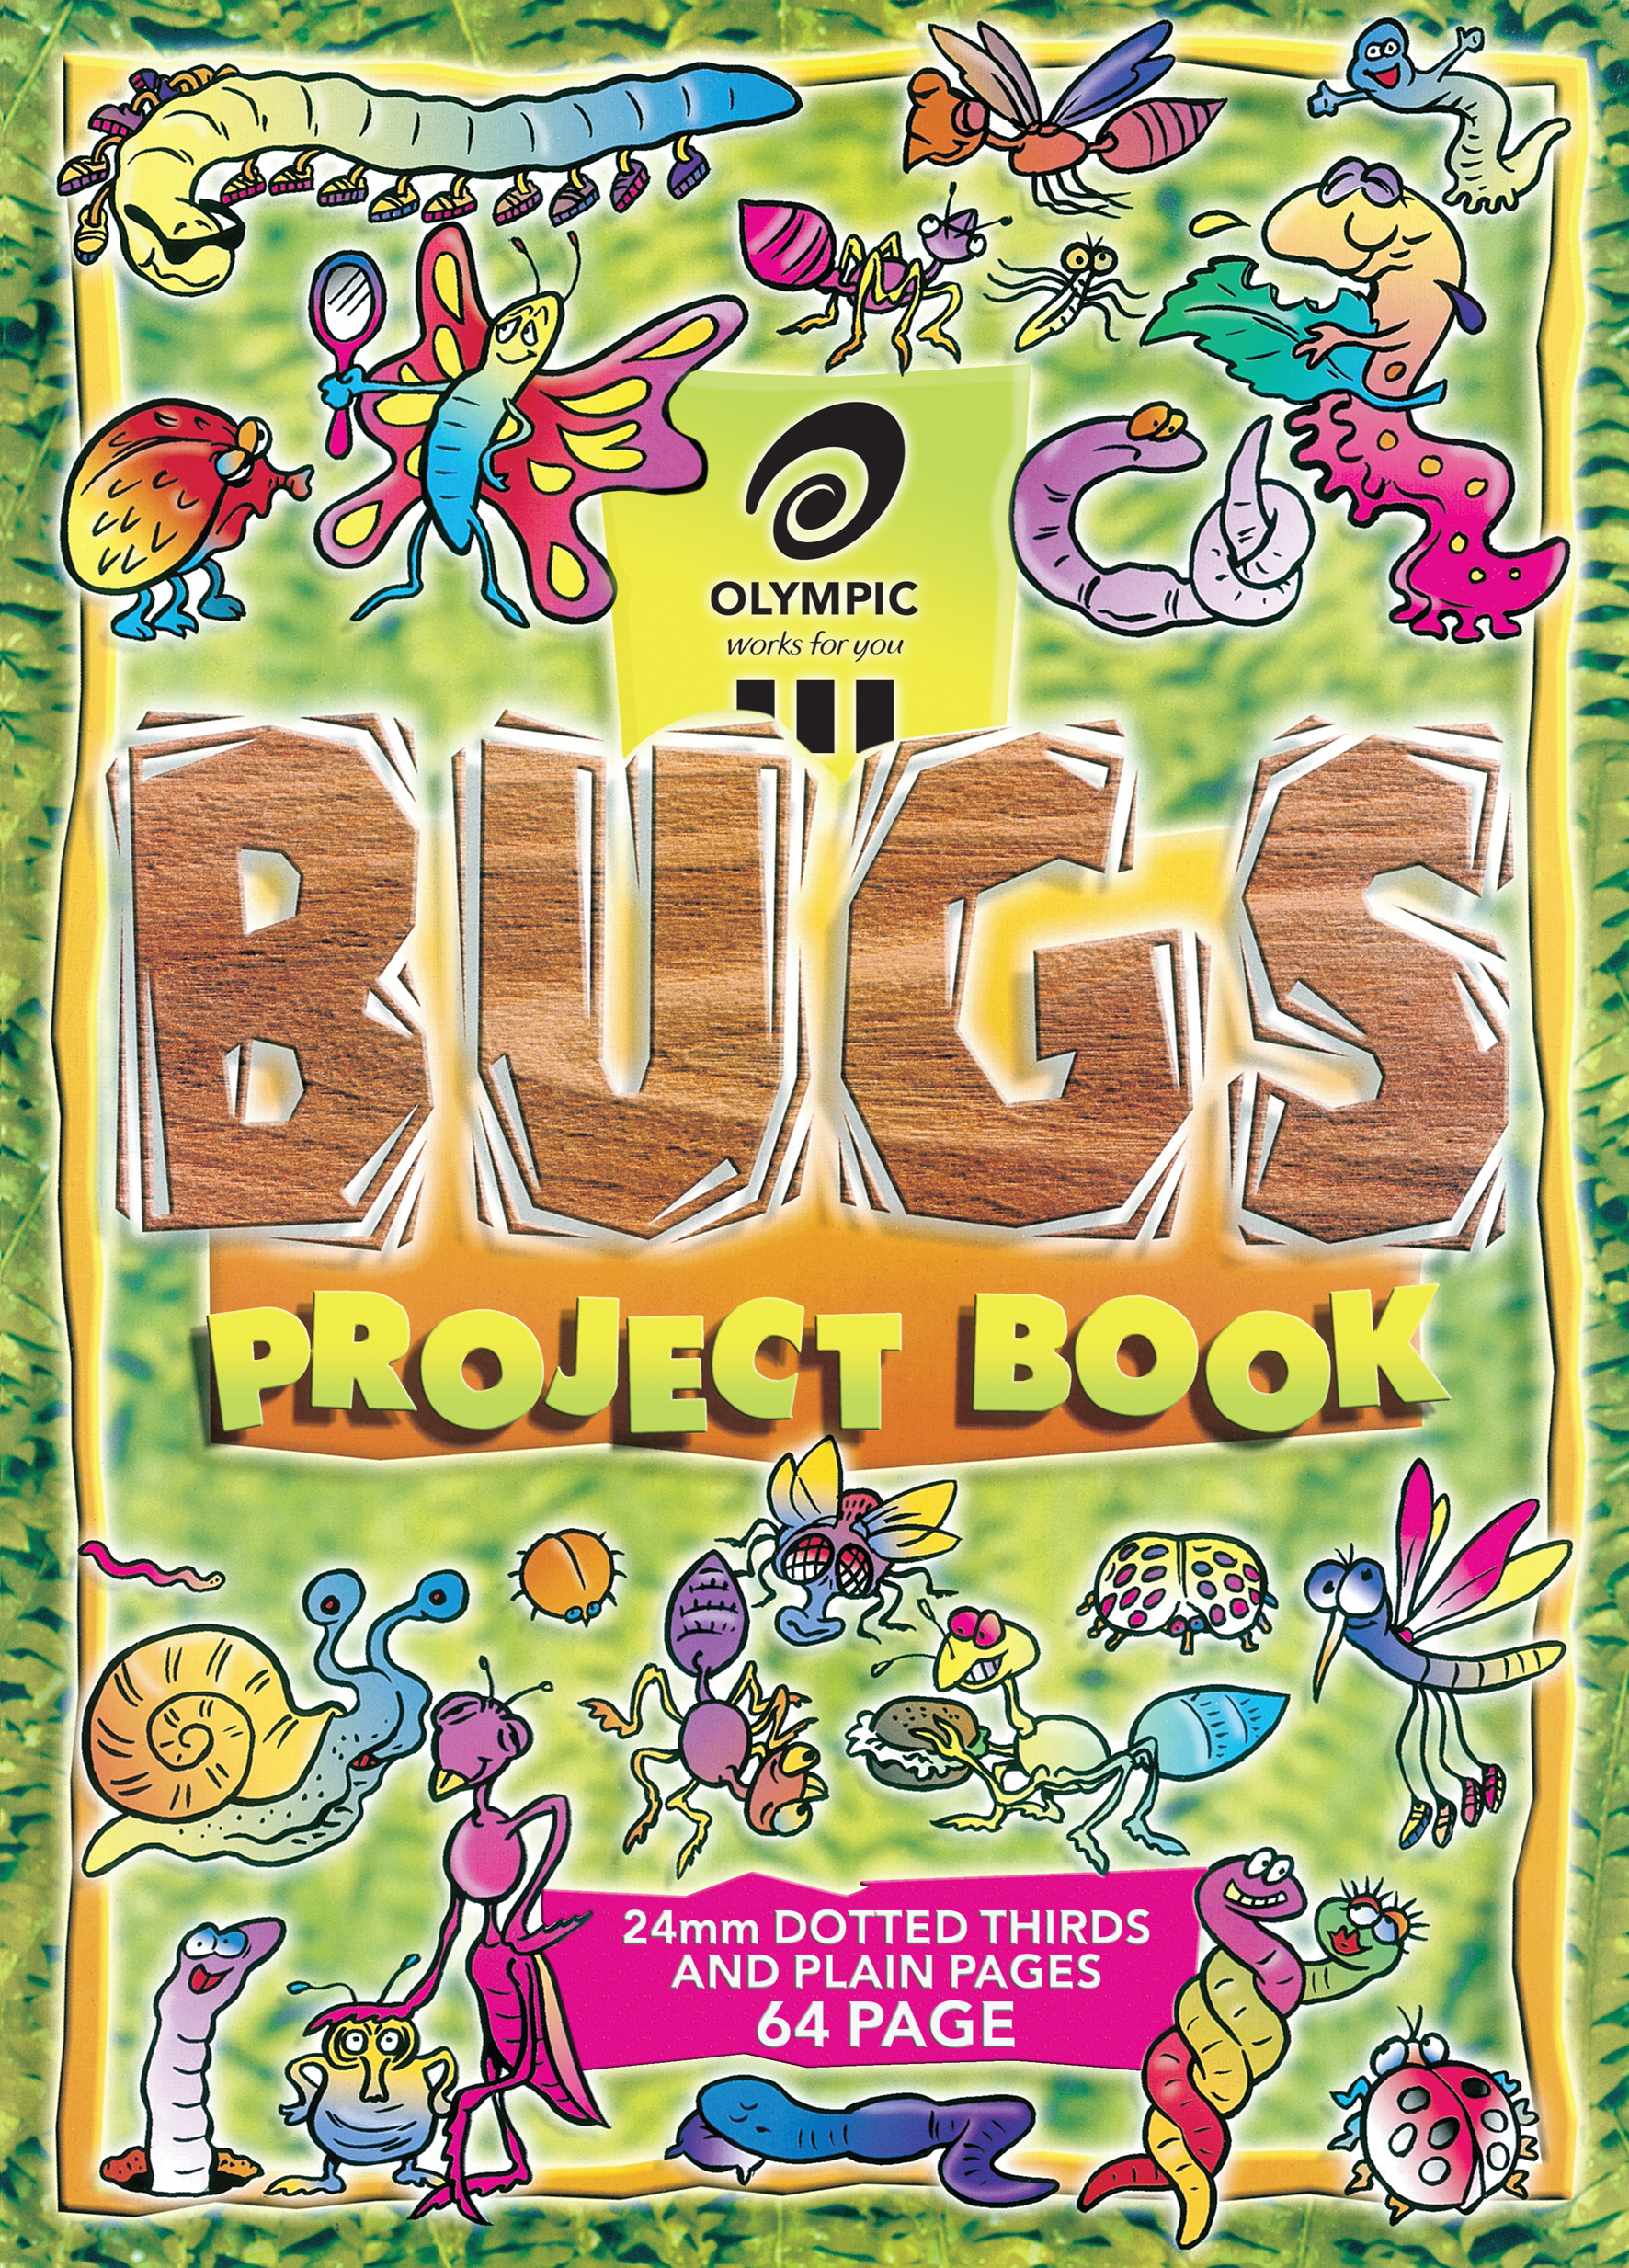 Project Book Bugs 335x240 24mm Dotted Thirds 64 Pages